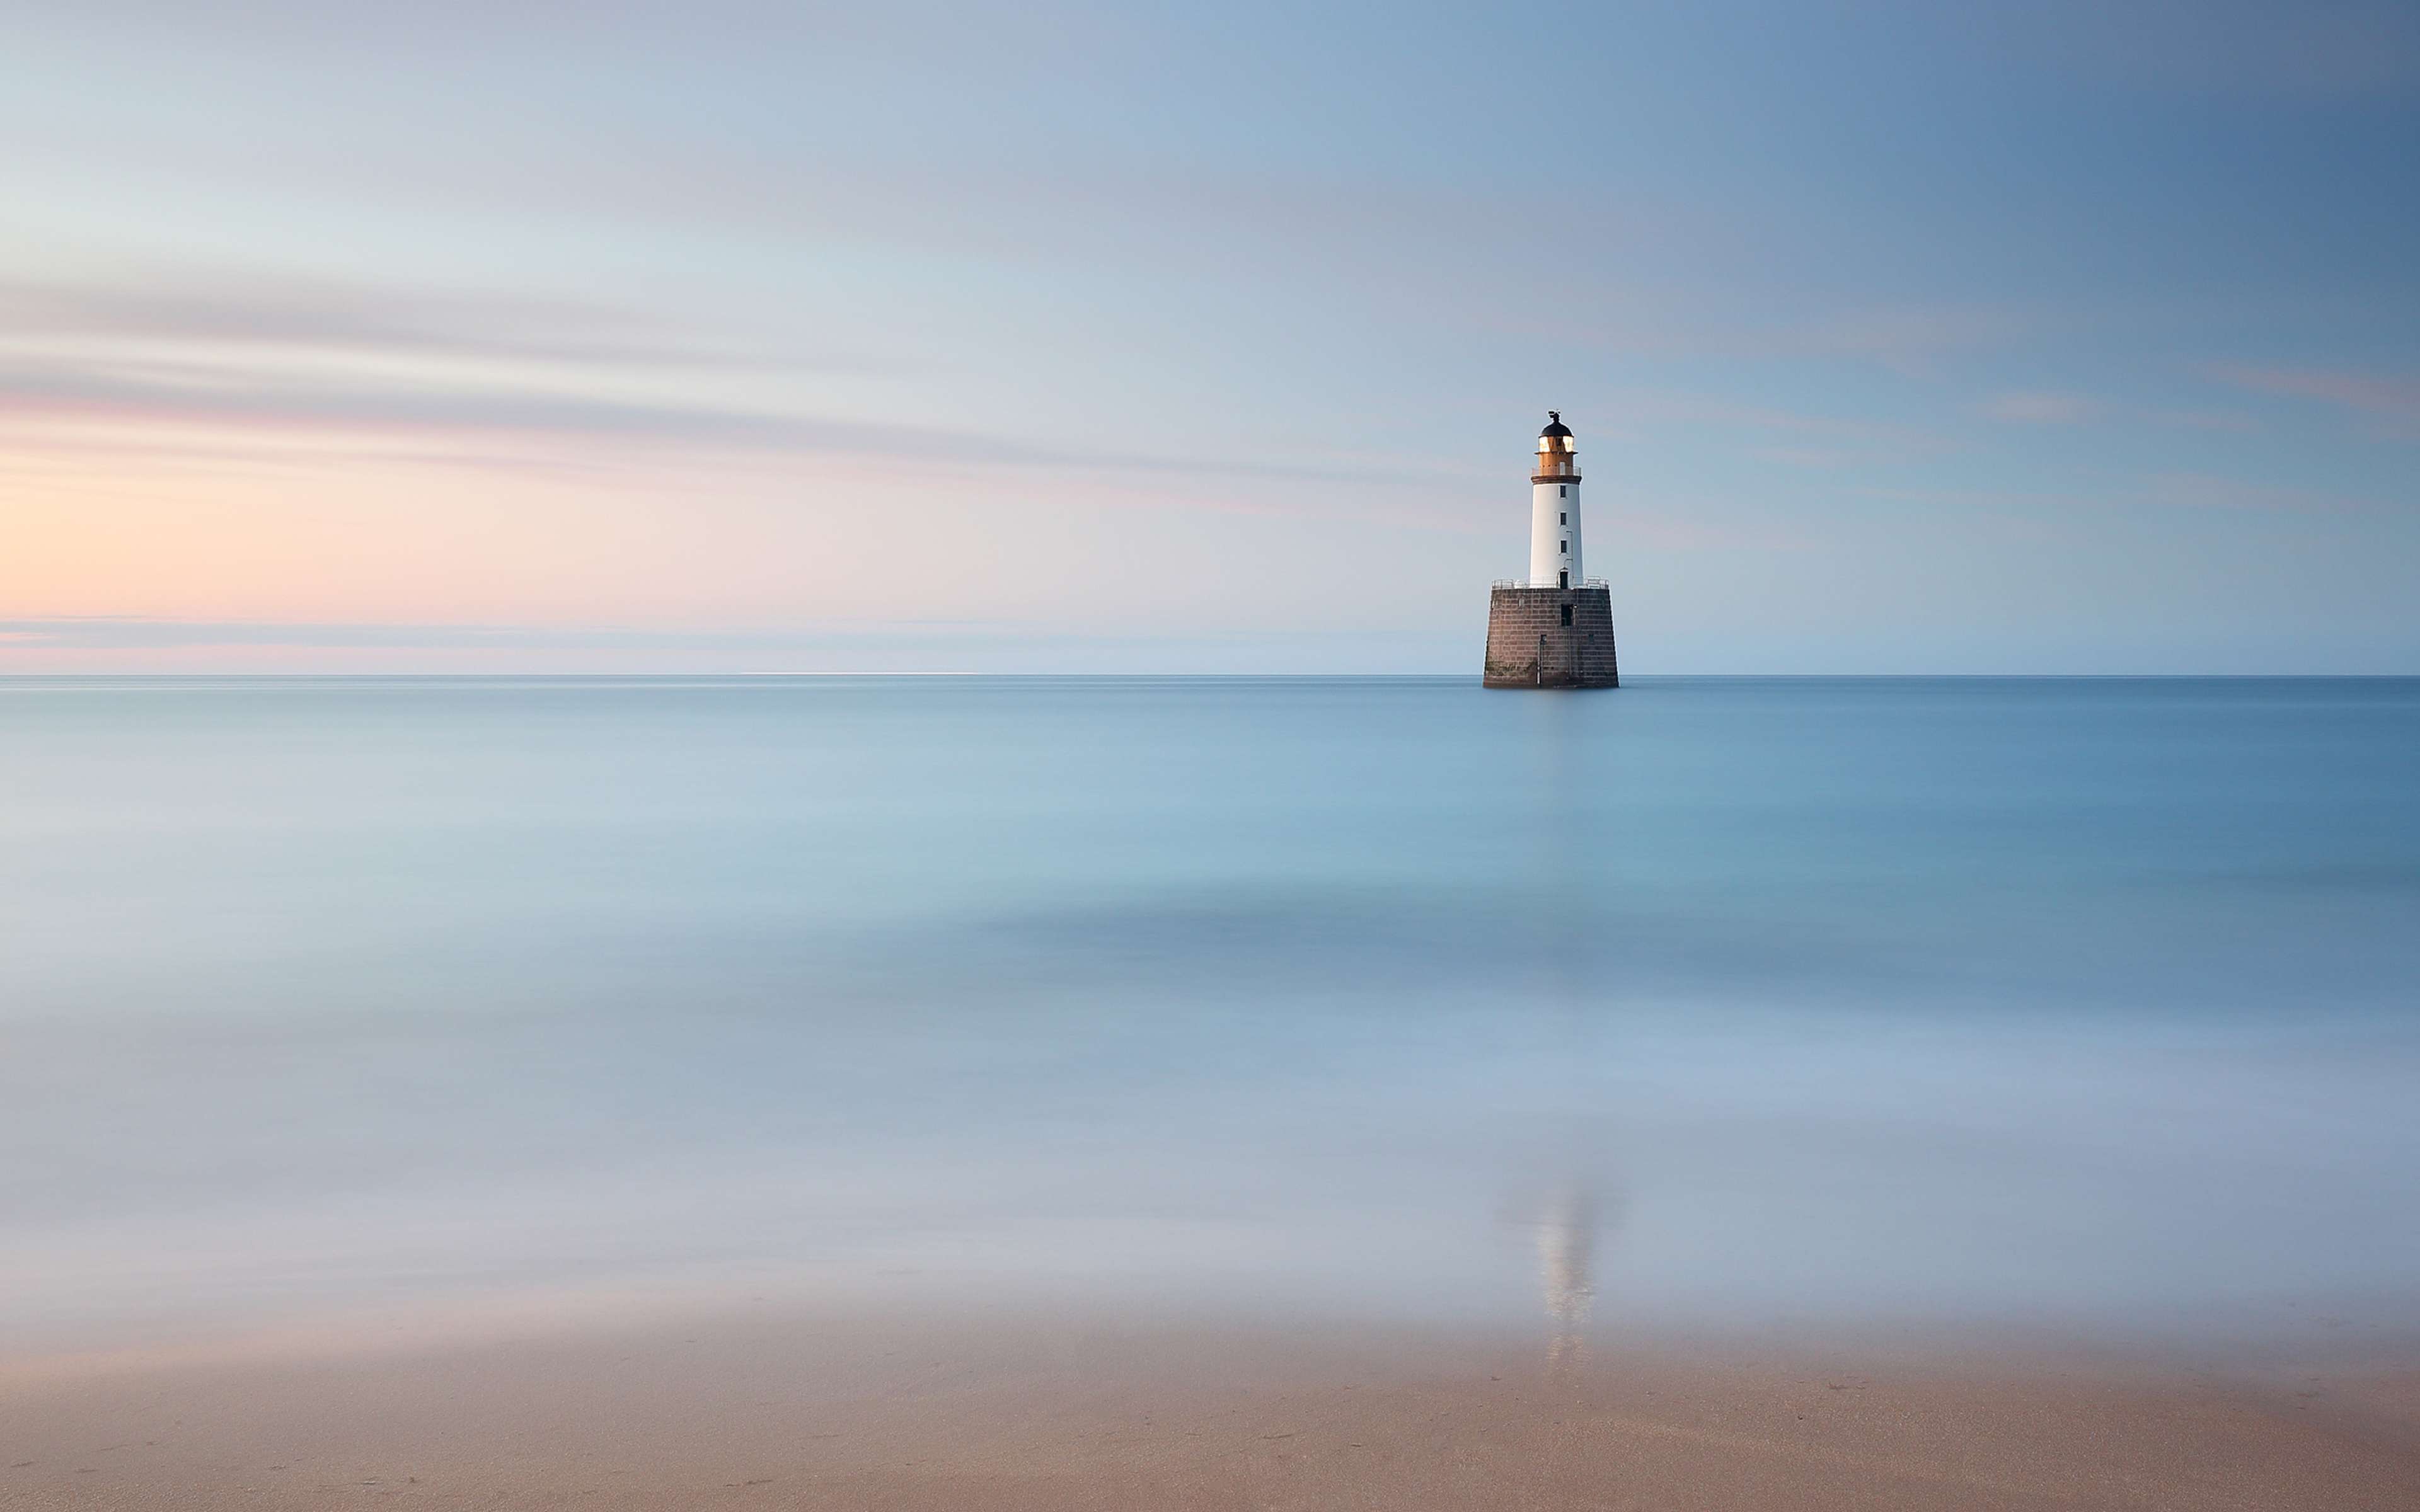 Rattray Head beach and lighthouse in the North Sea at dusk, Scotland.